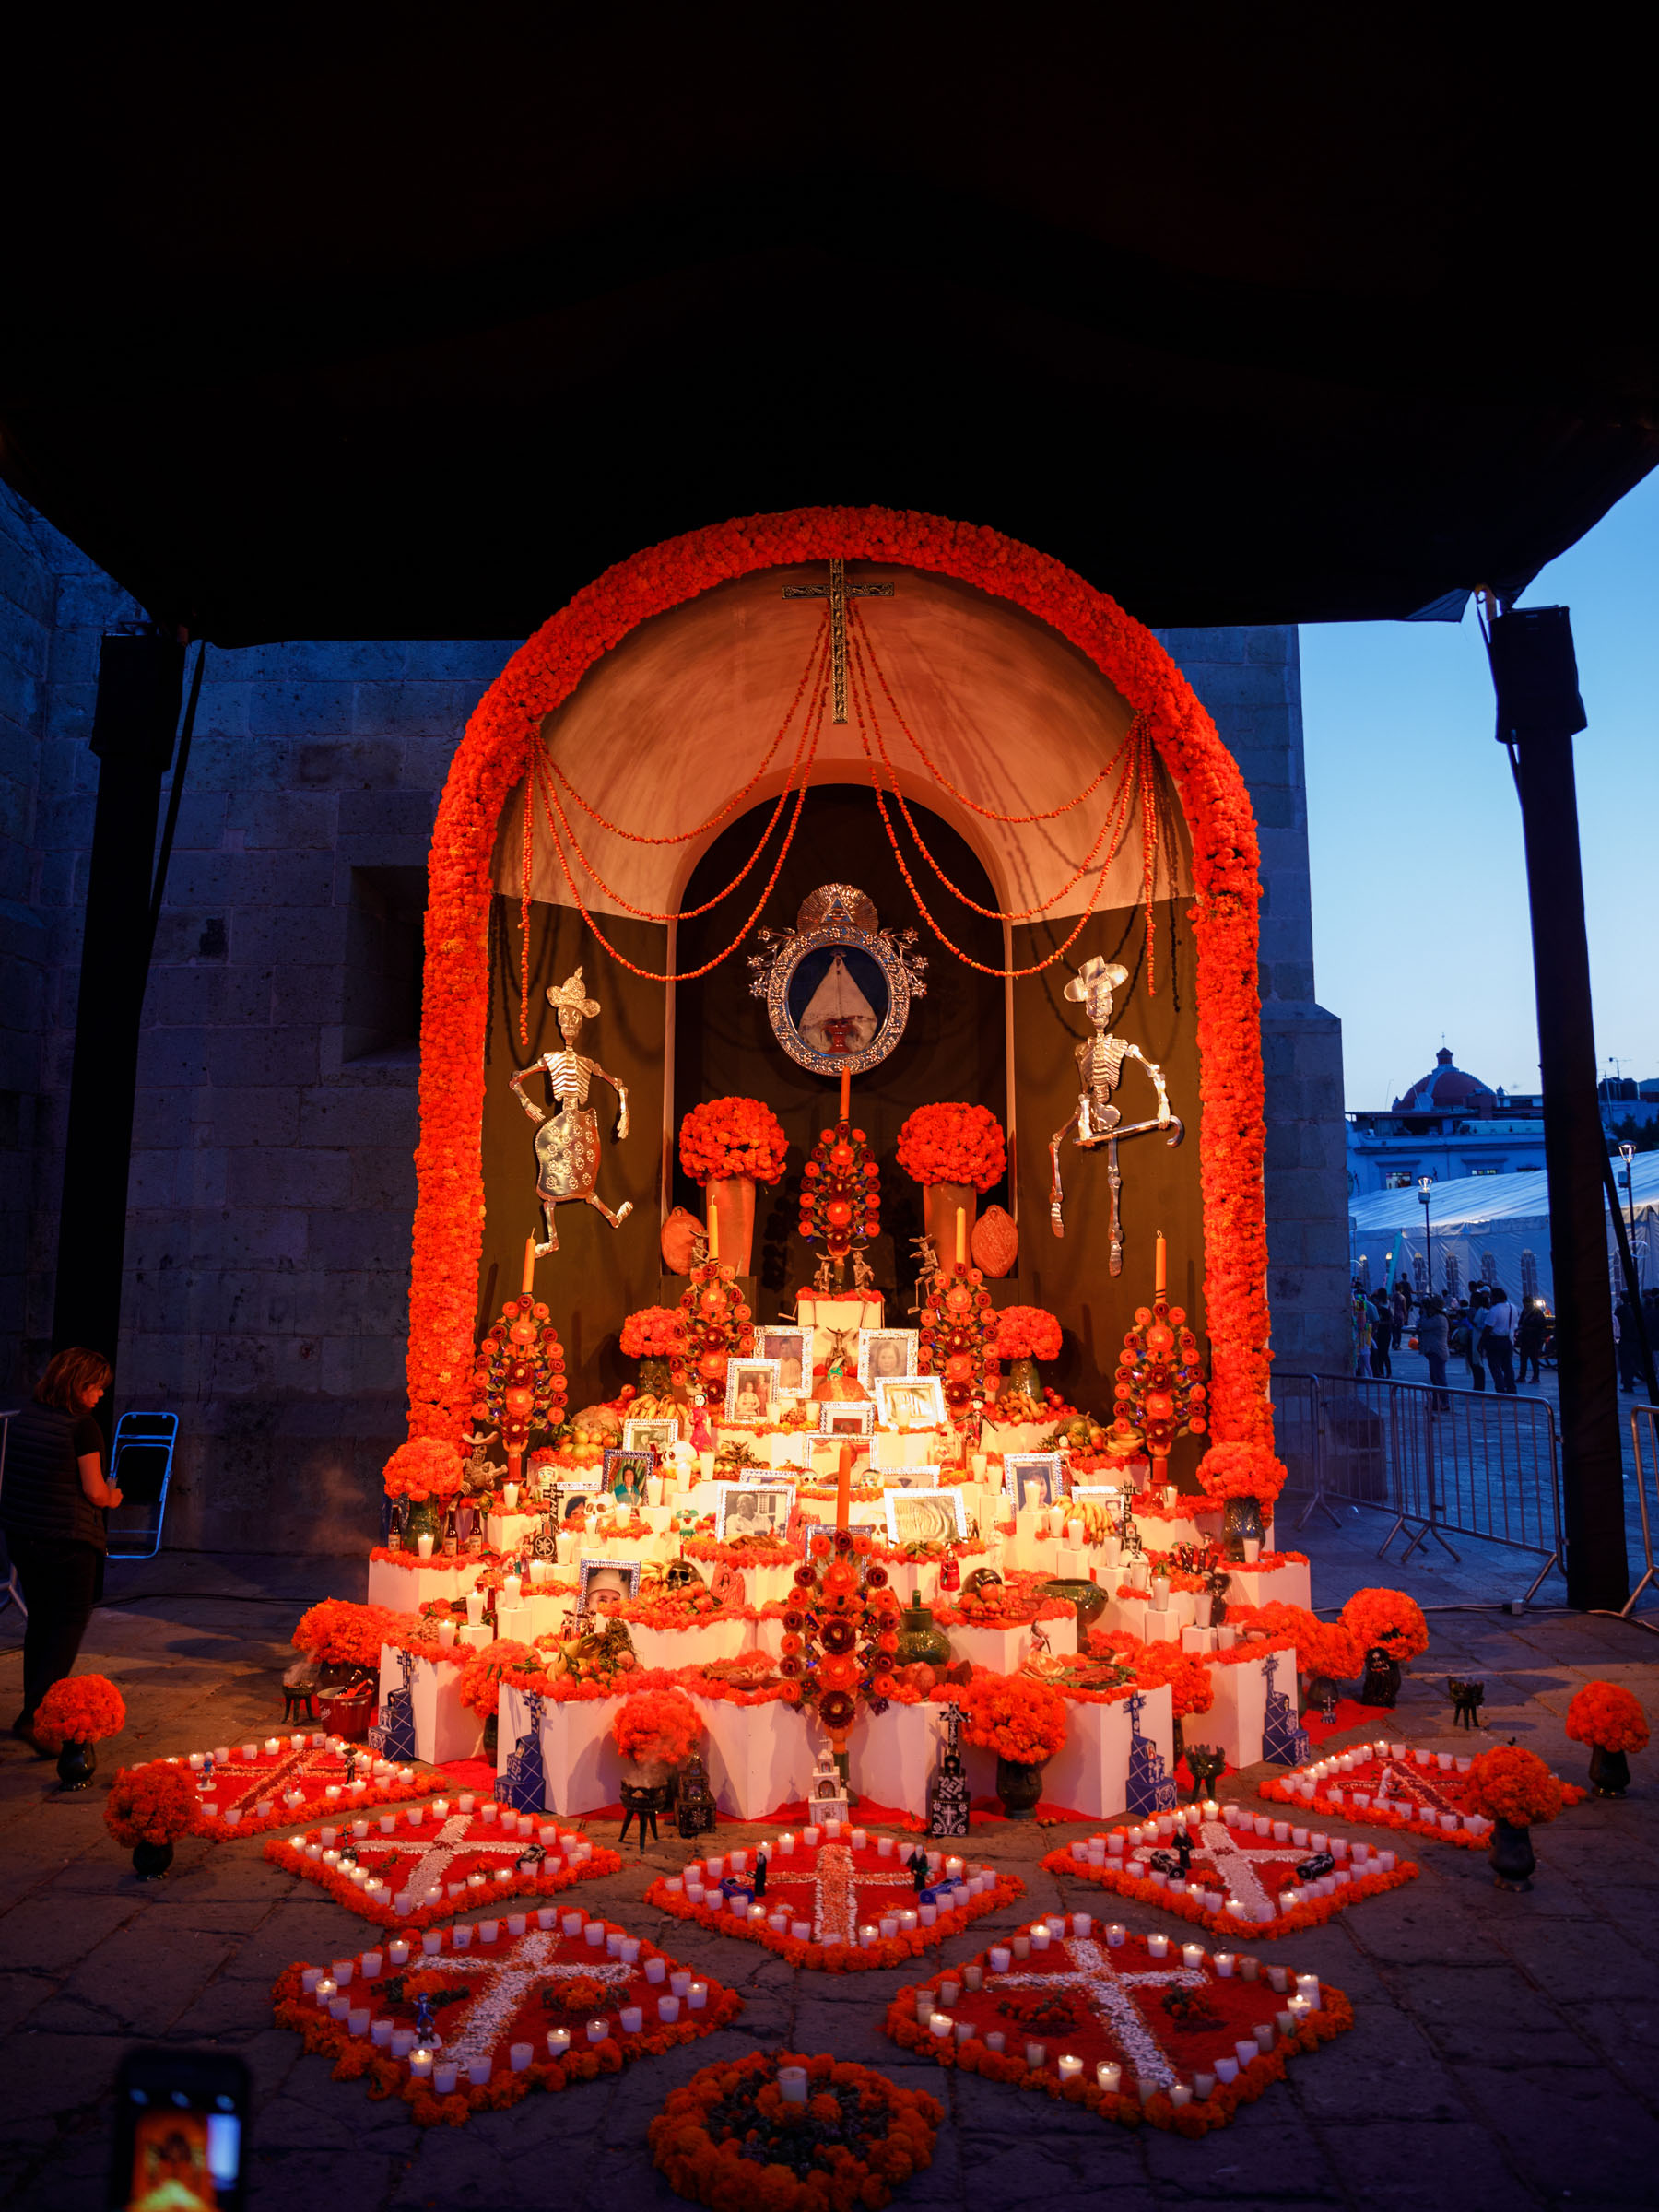 Fun Things to Experience in Mexico for Day of the Dead - Xoxocotlán Cemetery